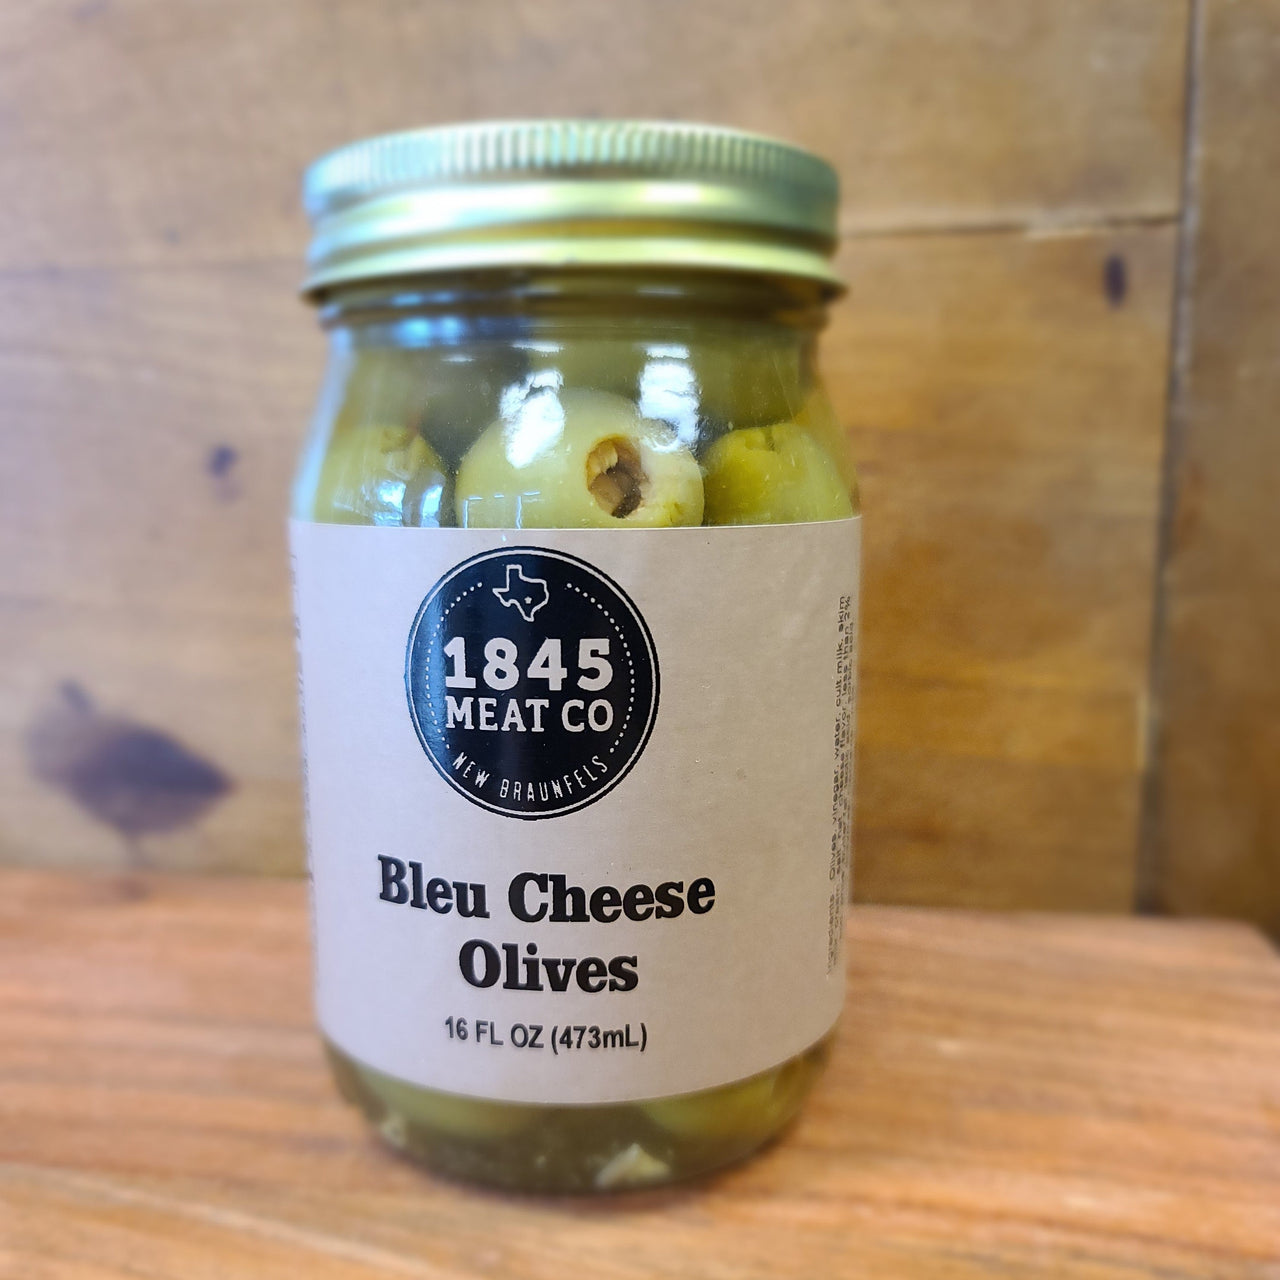 ﻿These olives are stuffed with Bleu Cheese and make a perfect complement to any smoked meat and also great with a Bloody Mary.